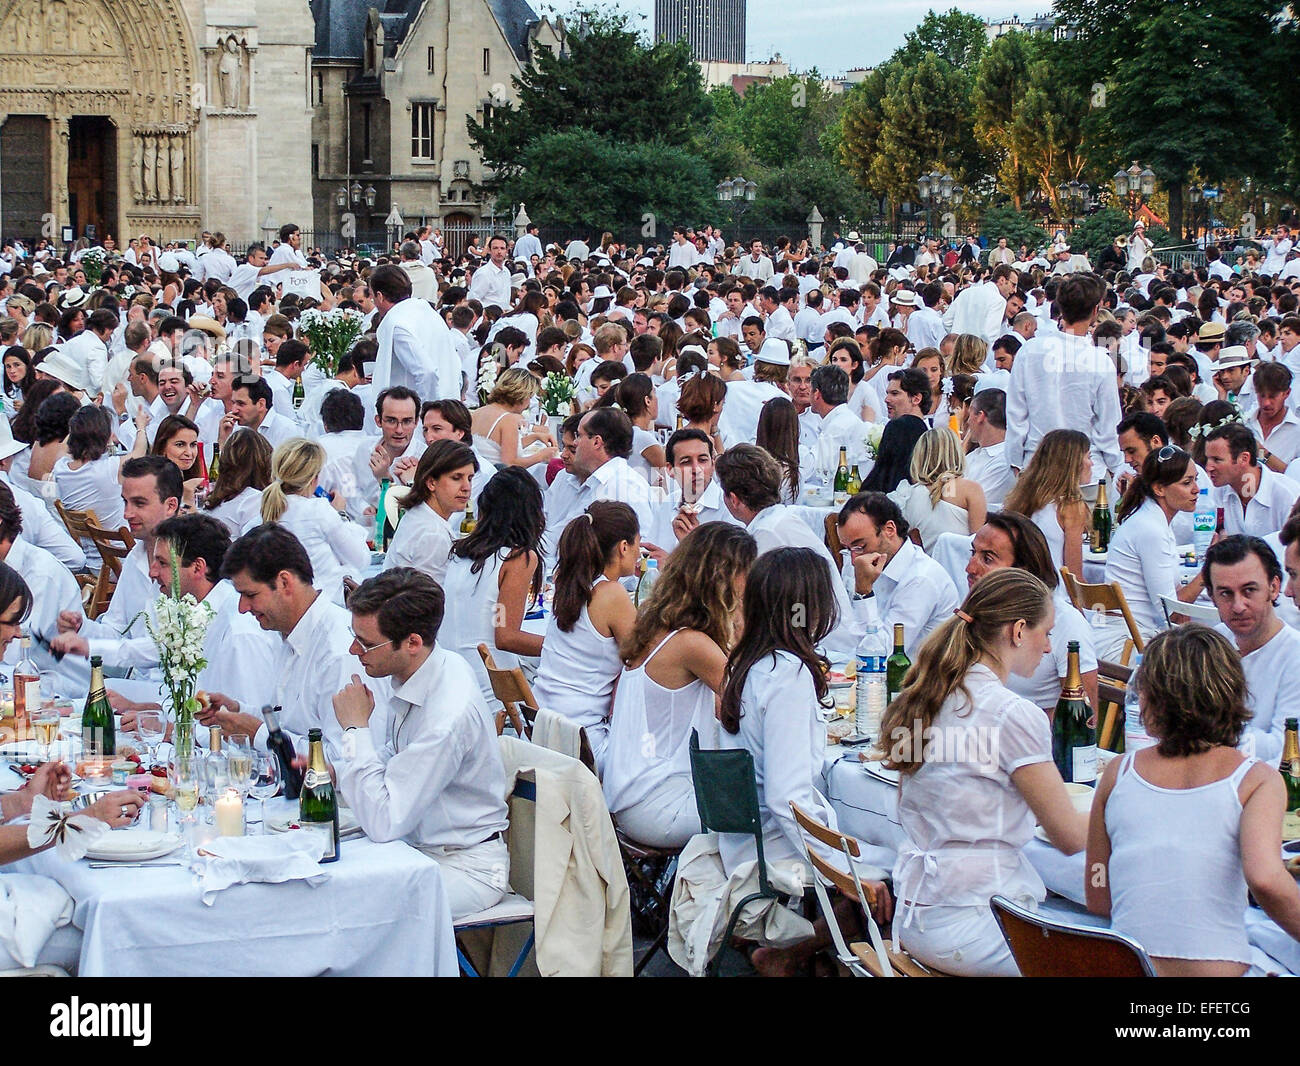 Paris, France. 16 Jun 2005 - Hunderds of people gather as a large crowd for the 17th 'Diner en Blanc' (Dinner in White), outside the Notre Dame cathedral. Invited guests know when the dinner will be, but not the location, which is only revealed on the day of the event. Its aim is to raise funds for cancer charities. Stock Photo